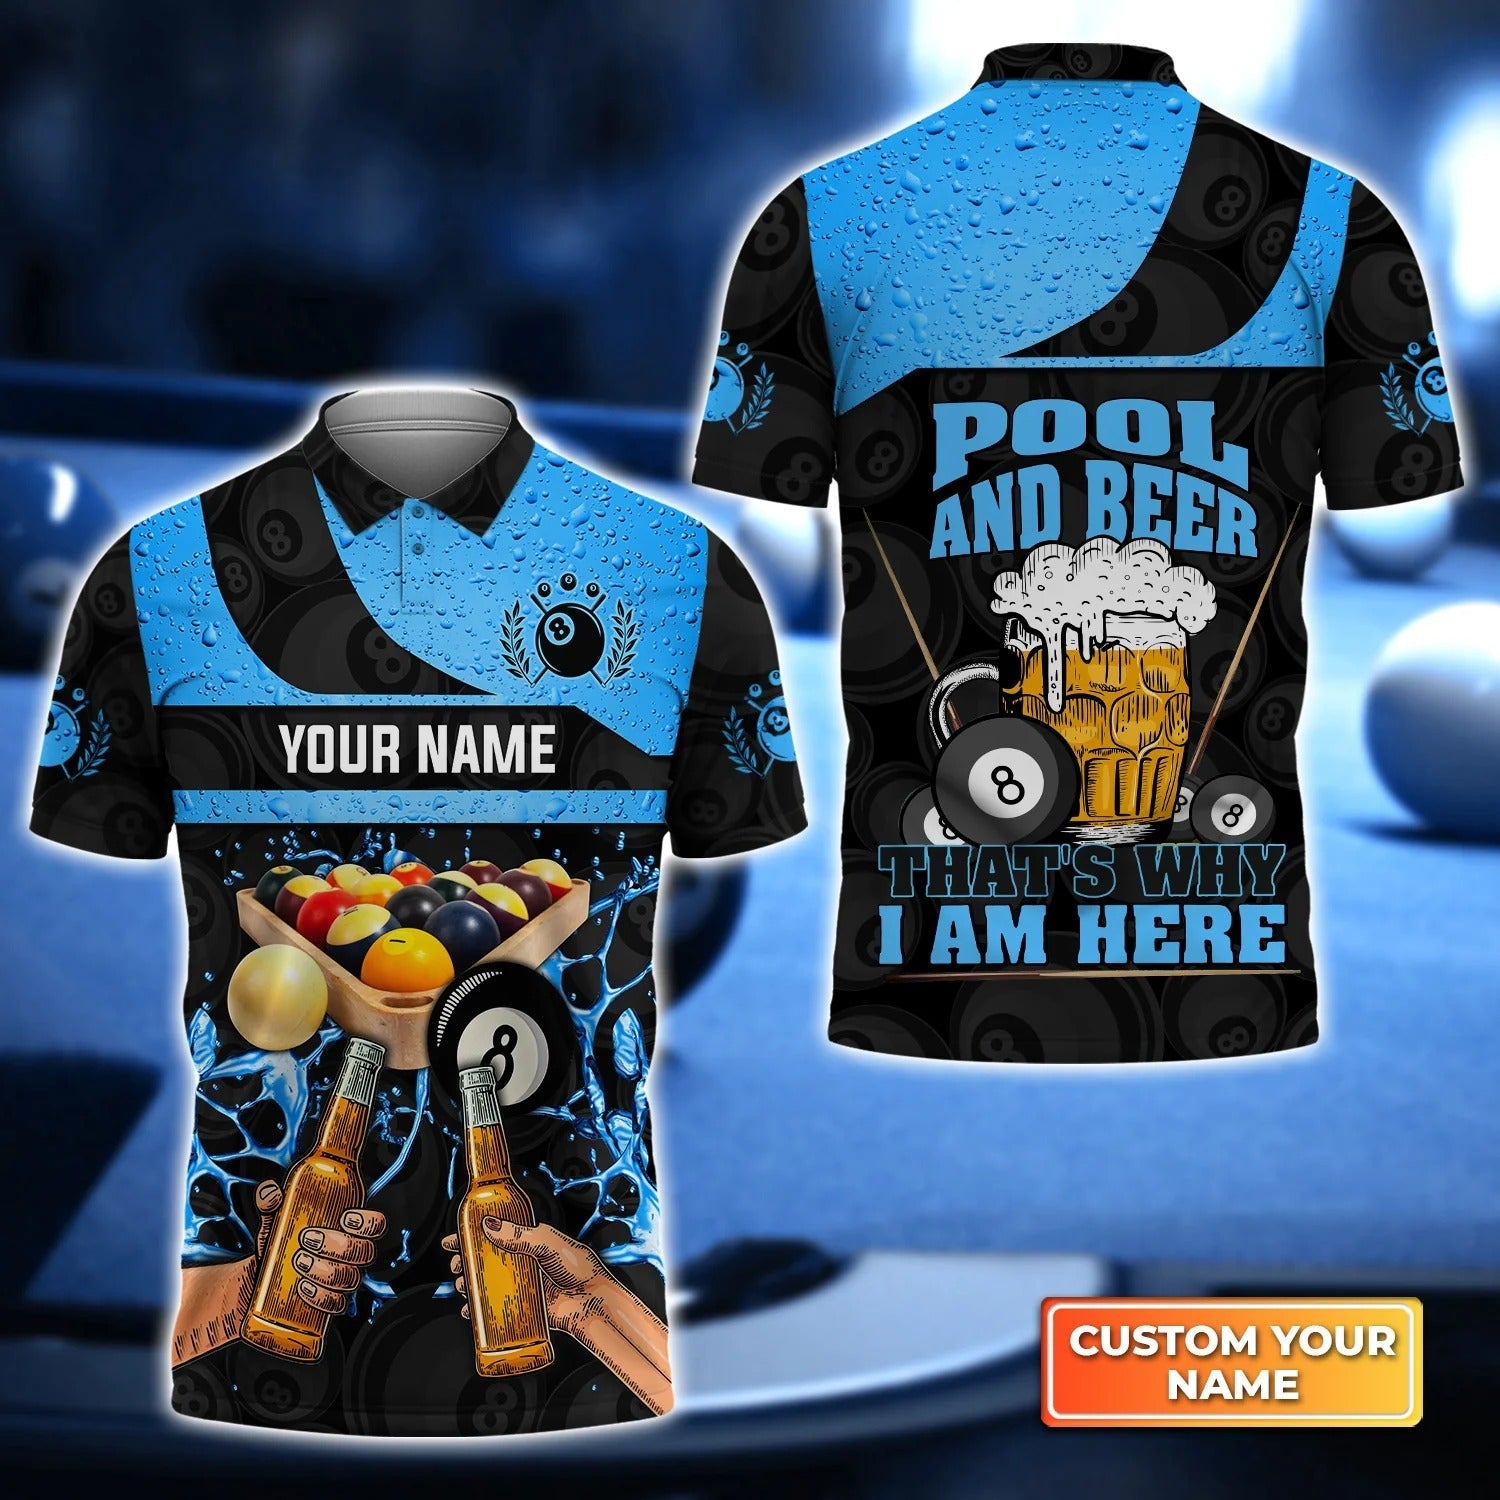 Custom Billiard Men Polo Shirt - Blue Ver Eight-Ball Pool And Beer That's Why I Am Here Personalized Name - Perfect Billiard Polo Shirt For Men Cornbee